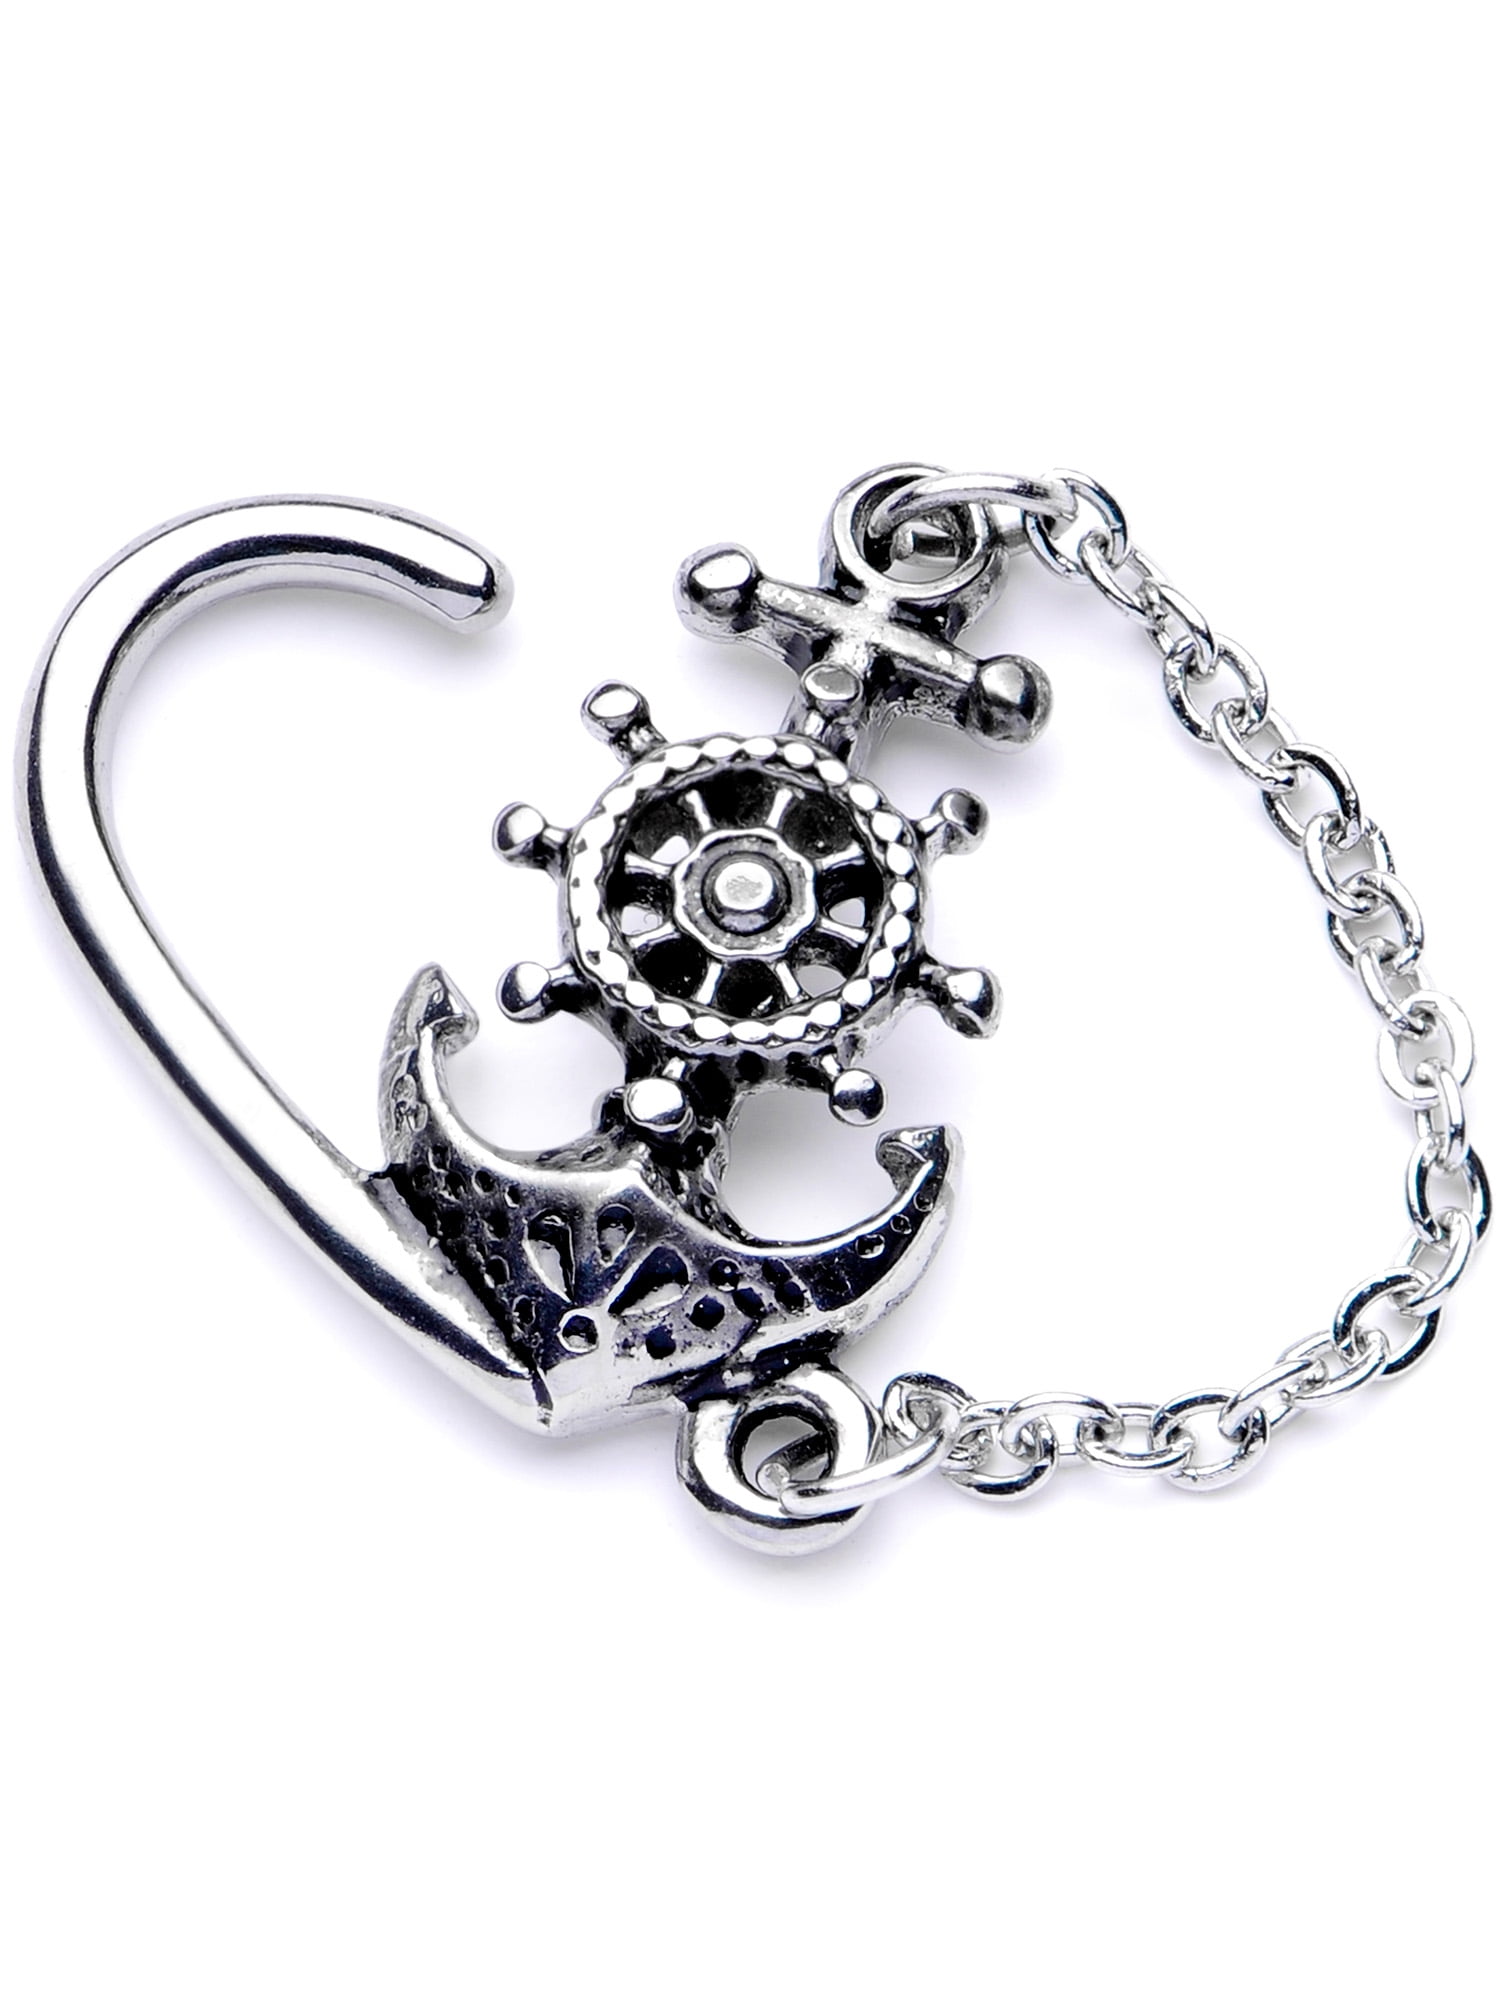 Stainless Steel O Ring Dangle Crystal Ear Weights with 18g Hooks  and Silver Plated Black and White Crystal Shields